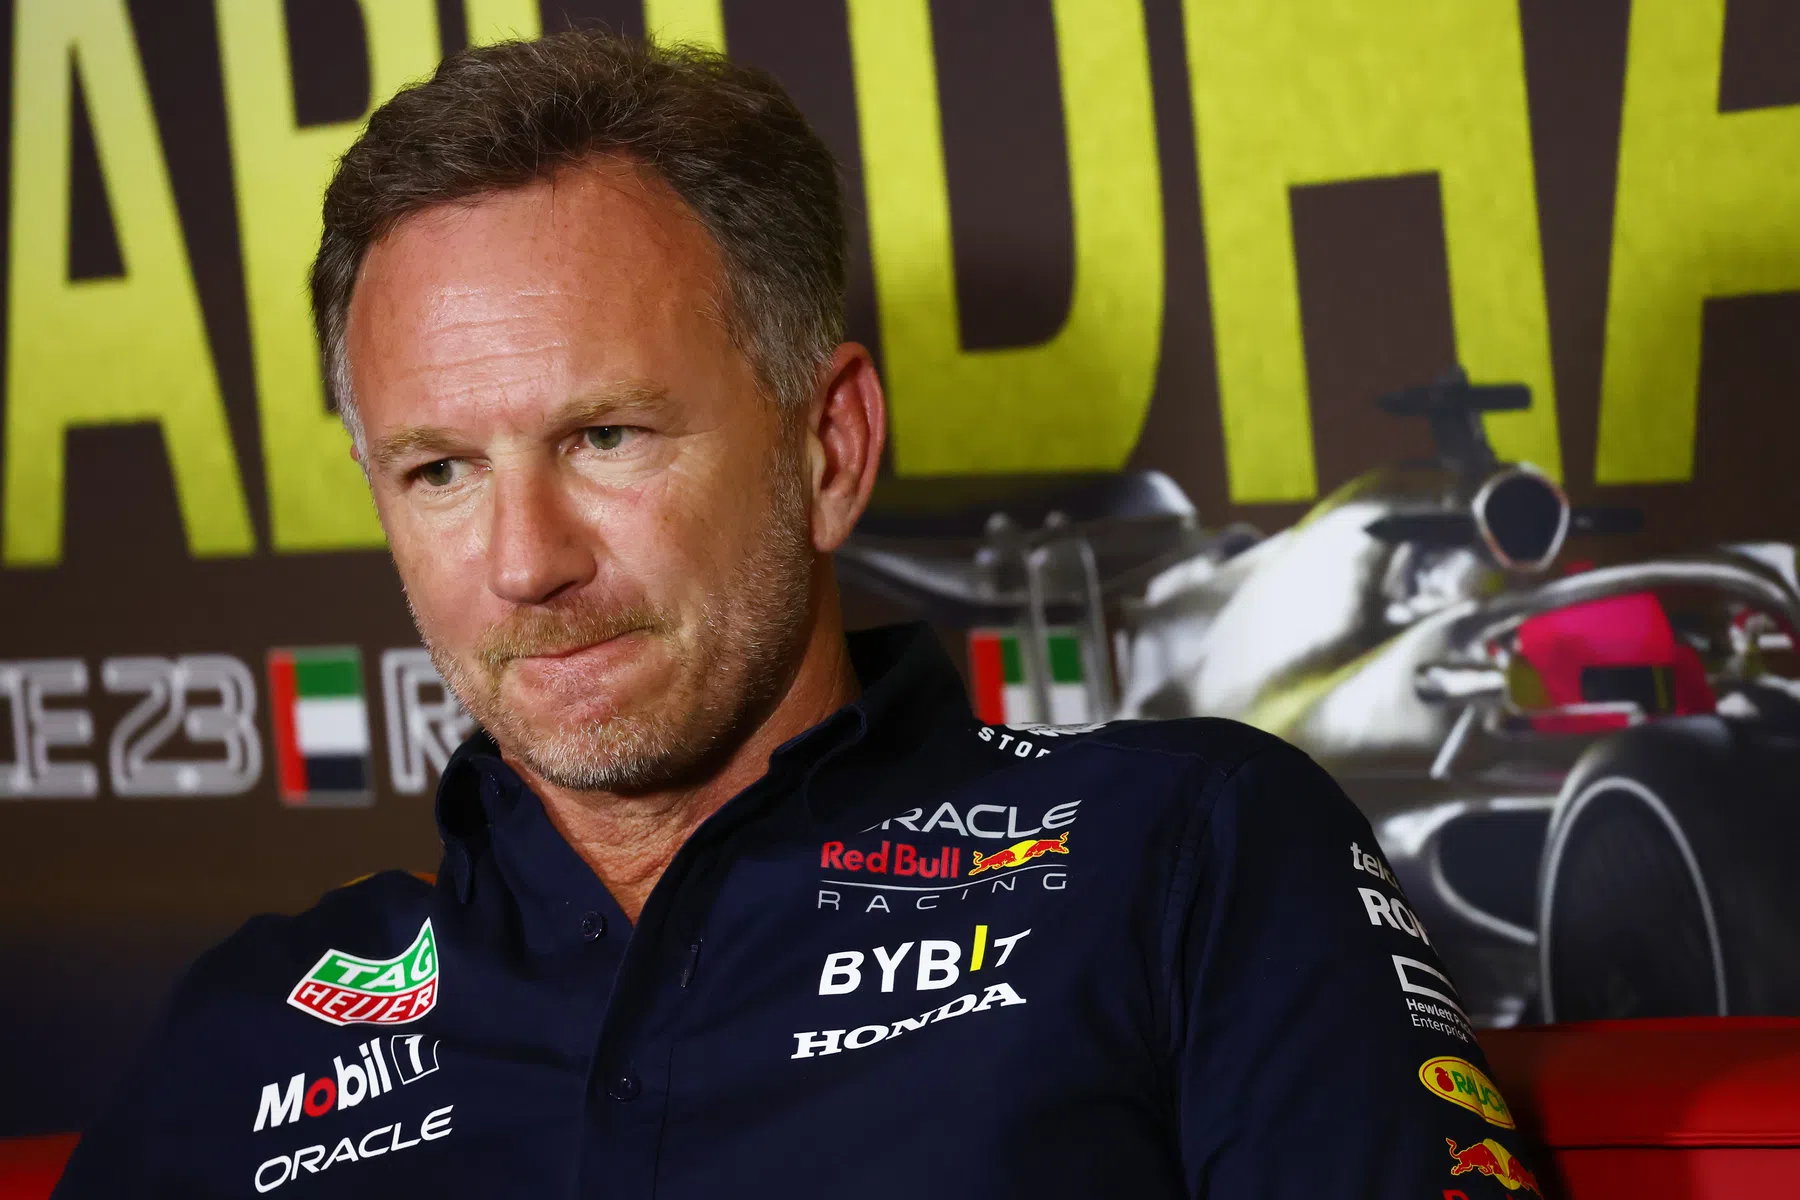 Sky Sports: 'Horner continues to work on despite allegations'